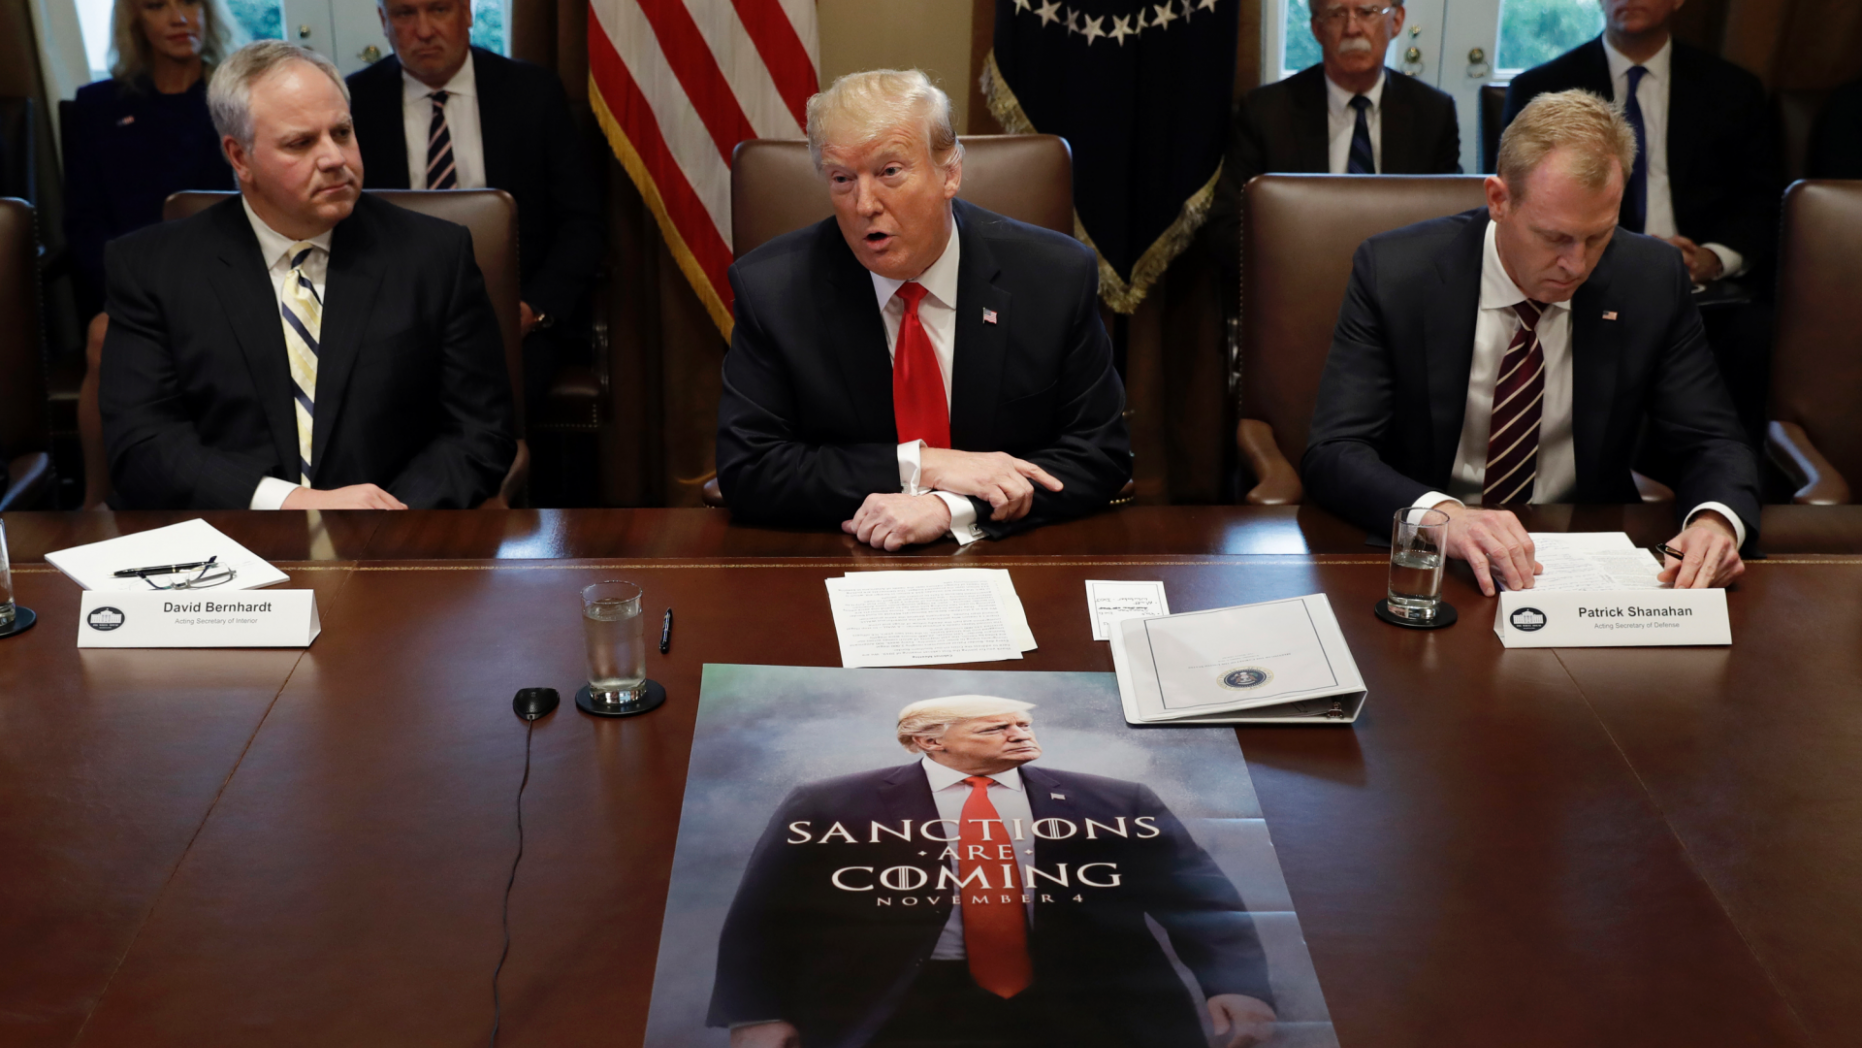 Trump’s ‘Game of Thrones’-inspired poster featured during Cabinet meeting sparks social media frenzy